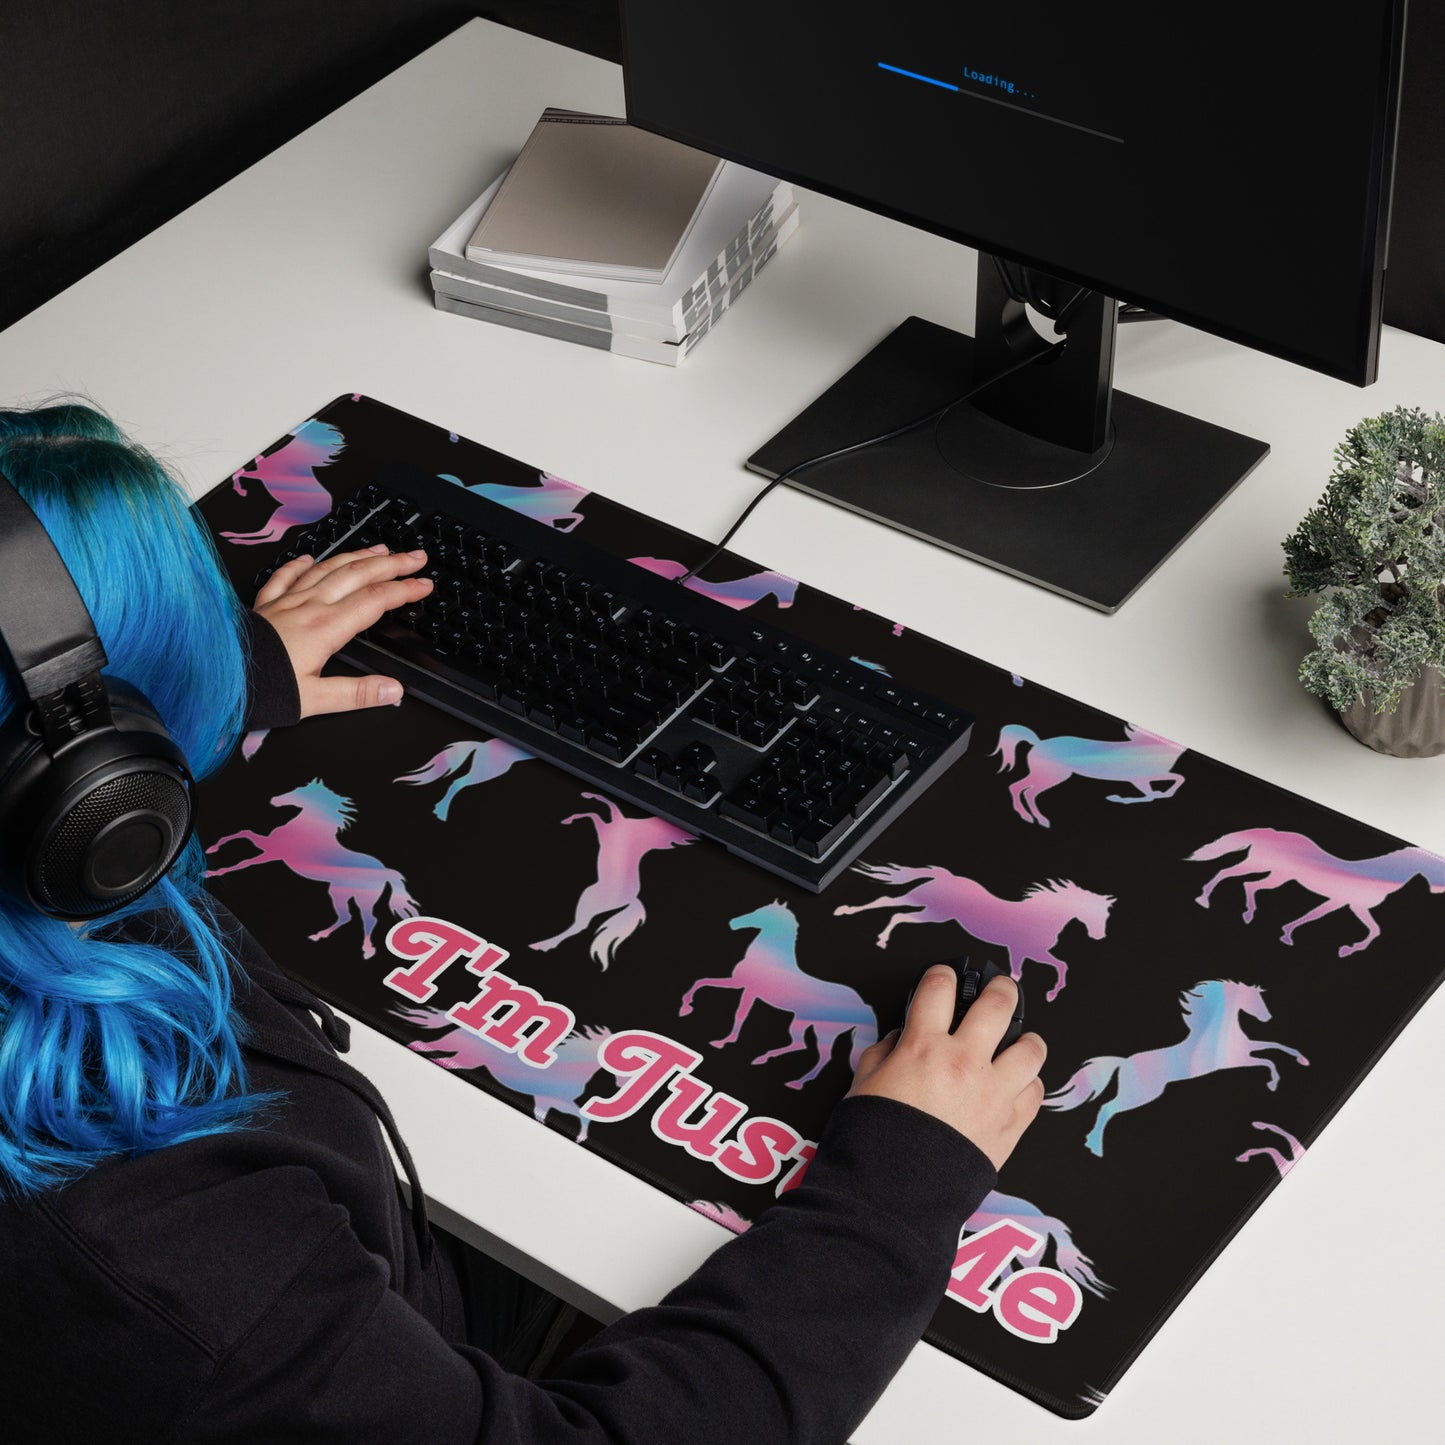 "I'm Just Me" Ken & Barbie's Pink and Blue Horses Gaming Mouse Pad